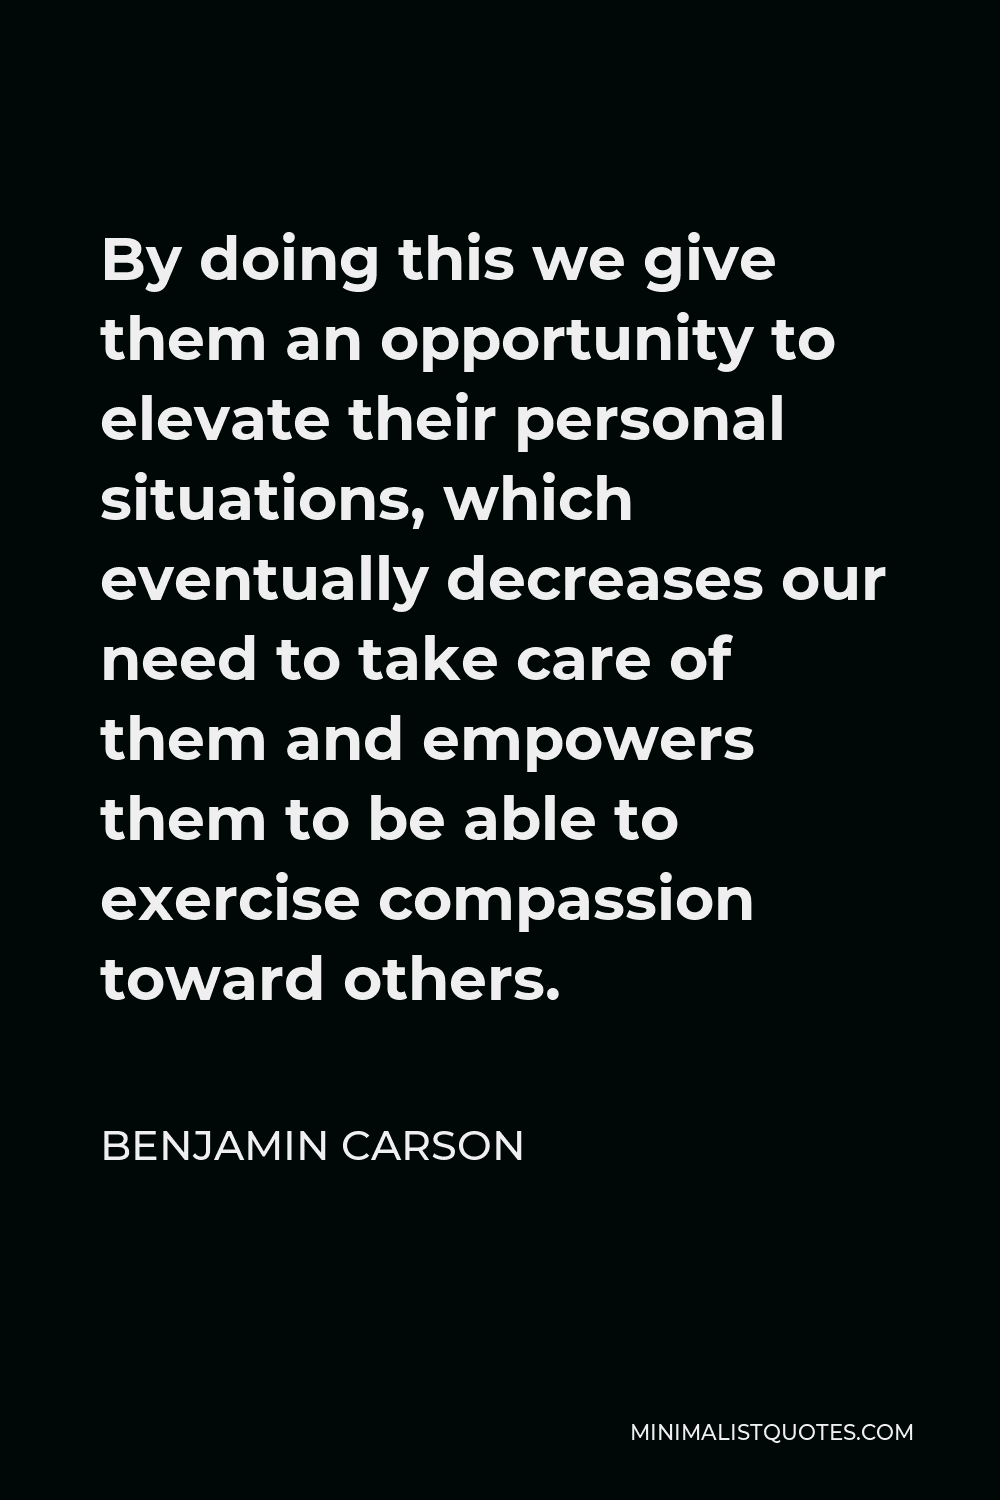 Benjamin Carson Quote - By doing this we give them an opportunity to elevate their personal situations, which eventually decreases our need to take care of them and empowers them to be able to exercise compassion toward others.